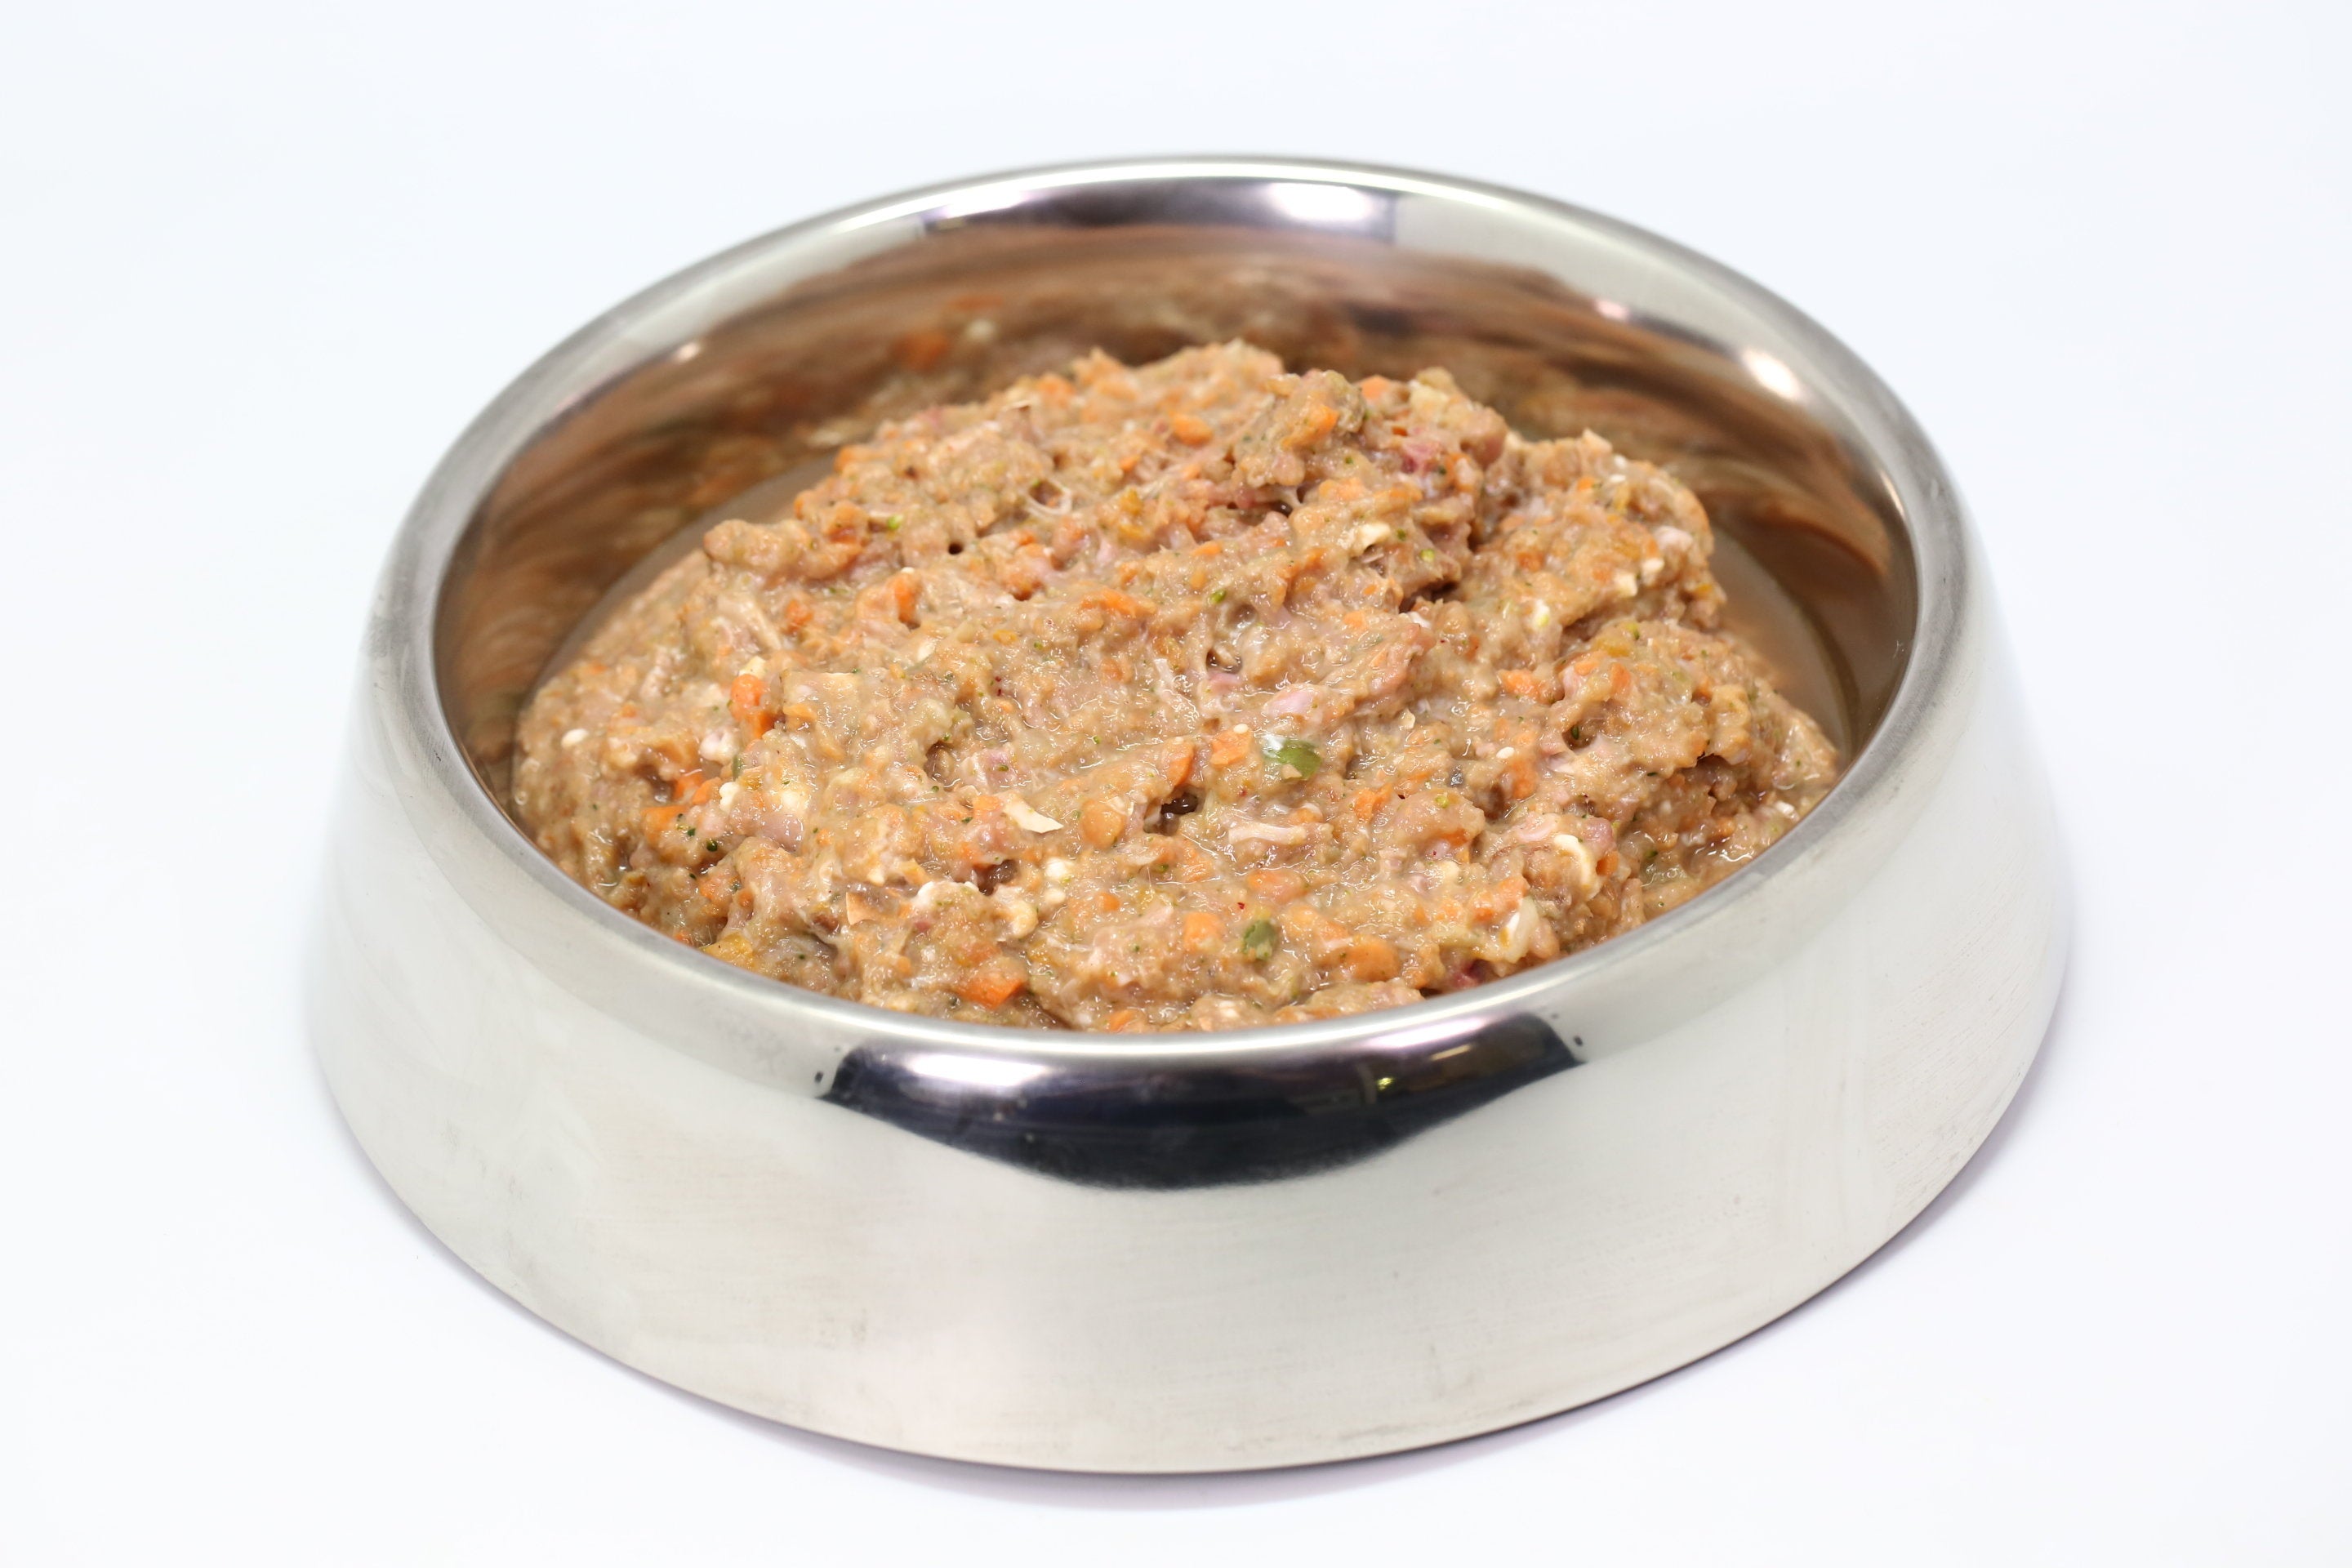 Somerford Raw & Natural - Low Purine Puppy Food New England Beef & Veg Pack + FREE Meaty Bones